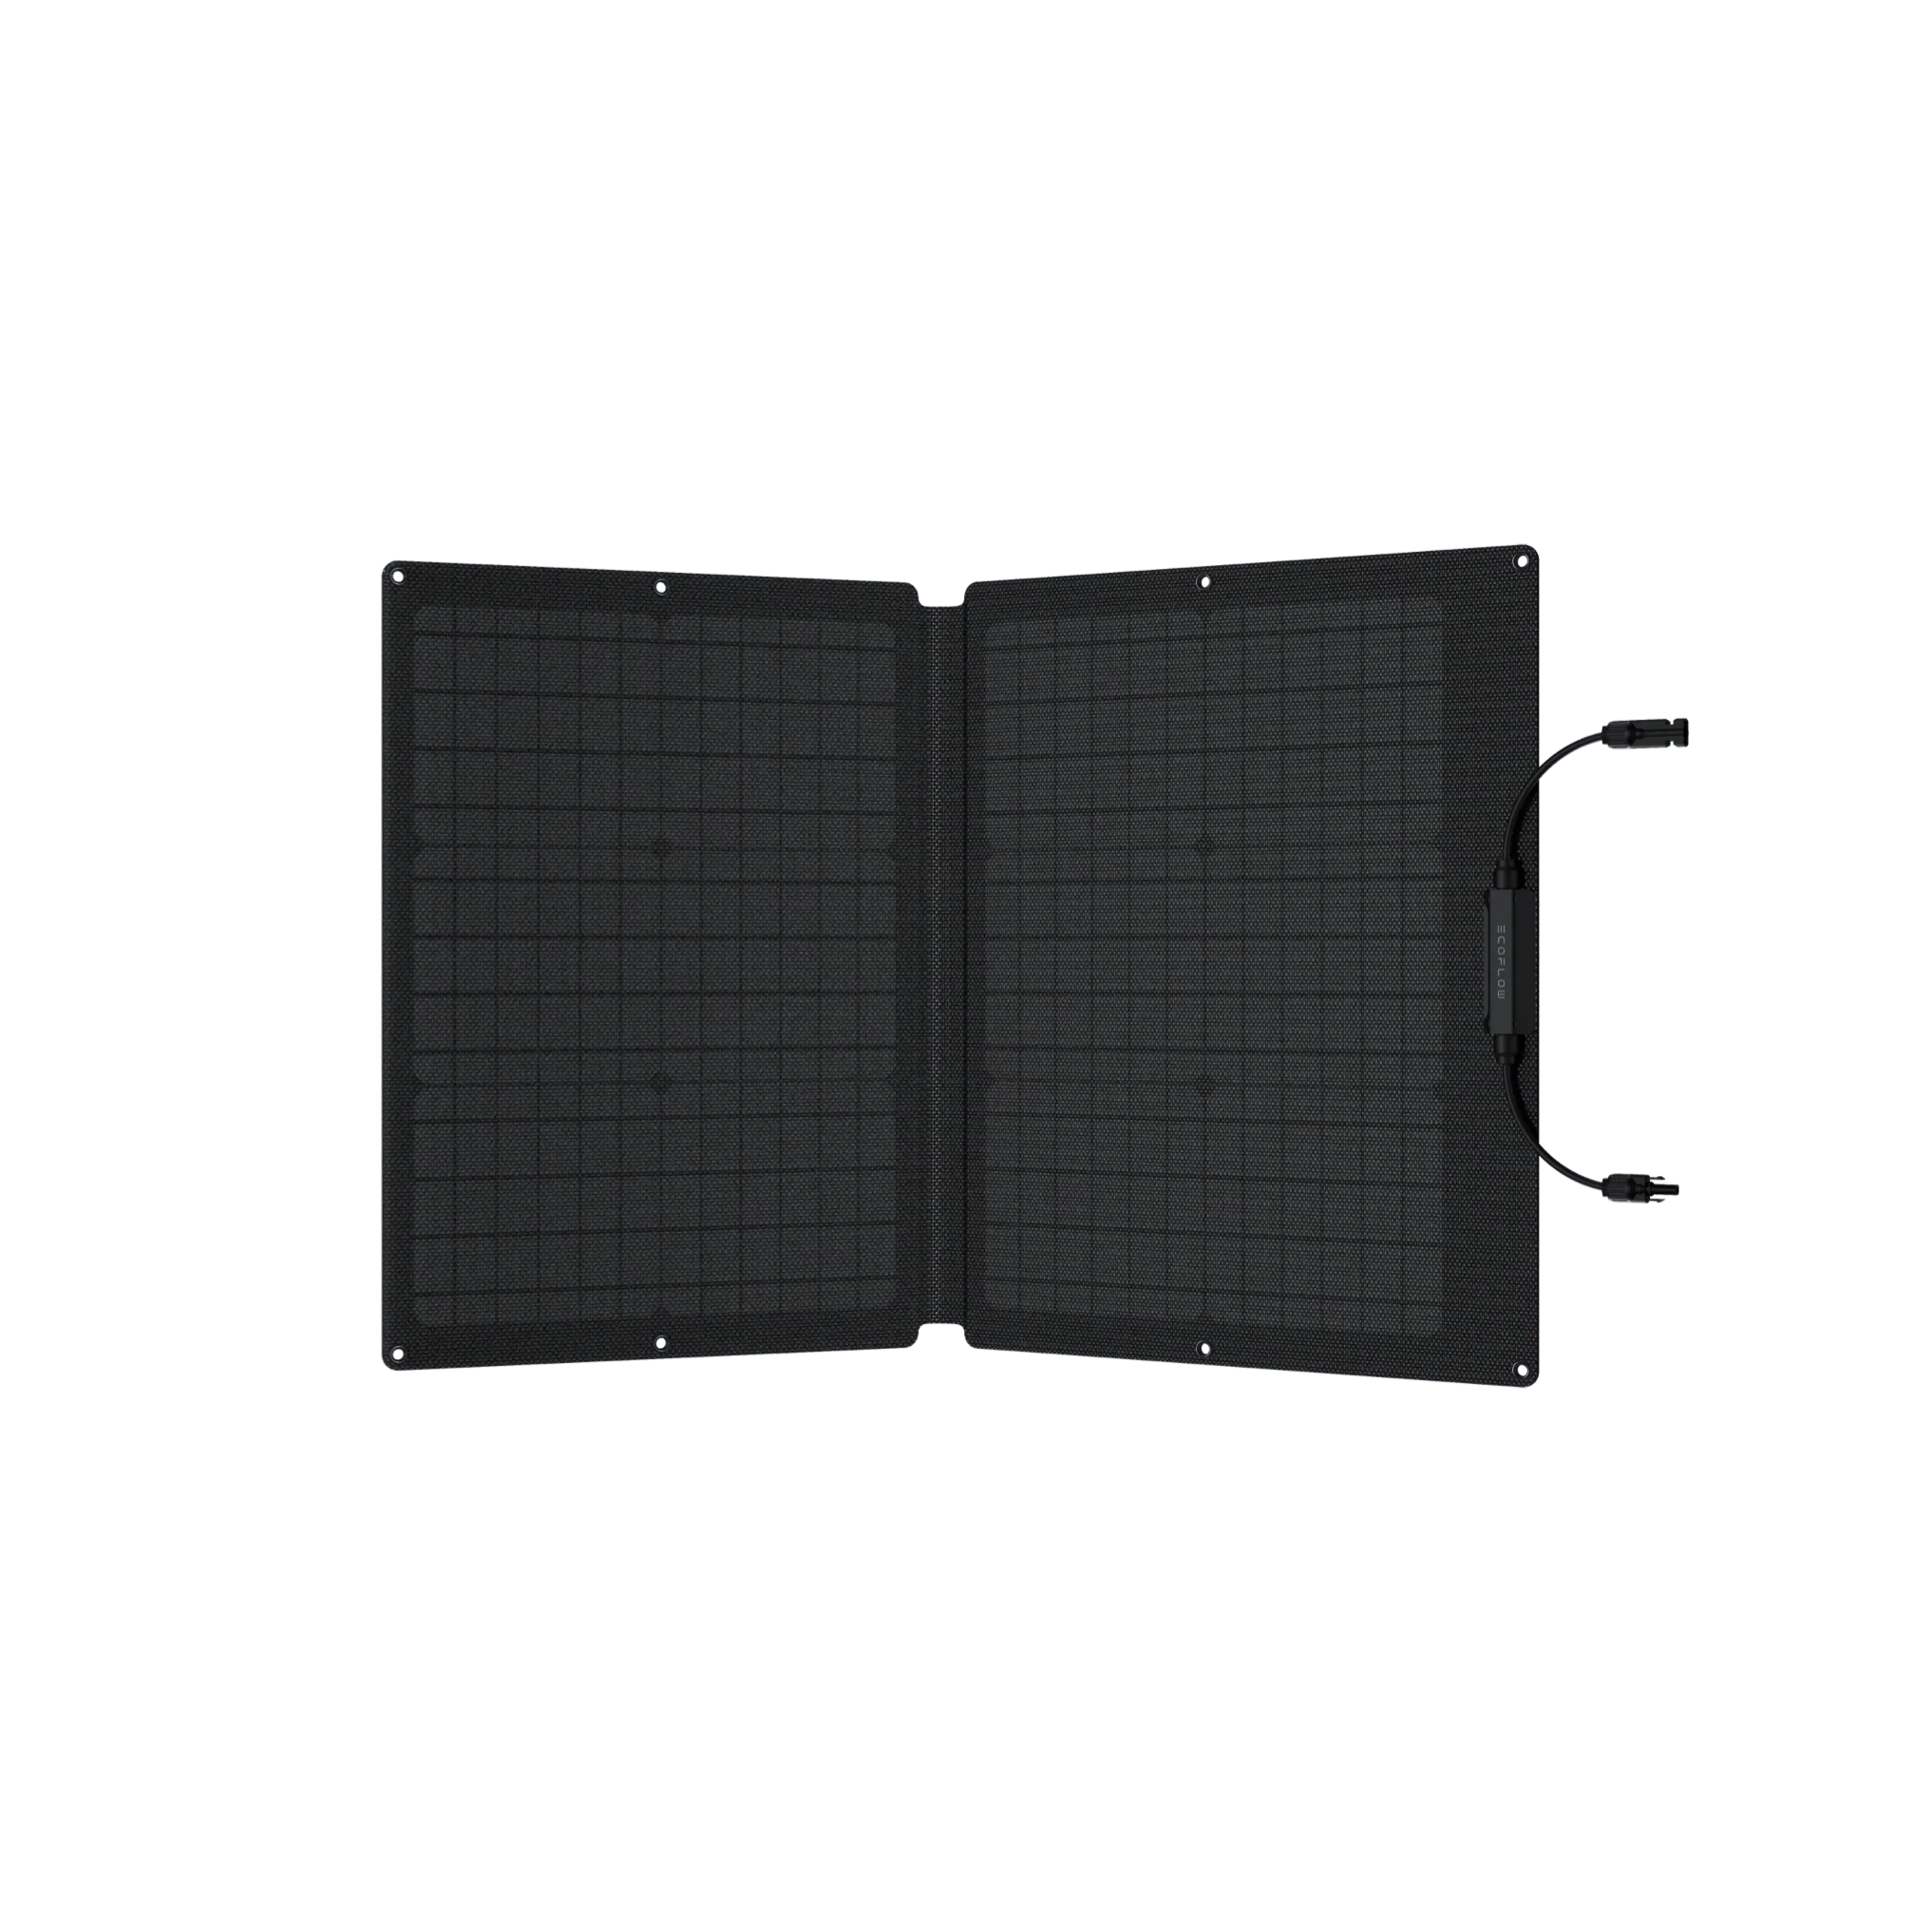 A black solar panel on a white background manufactured by EcoFlow.